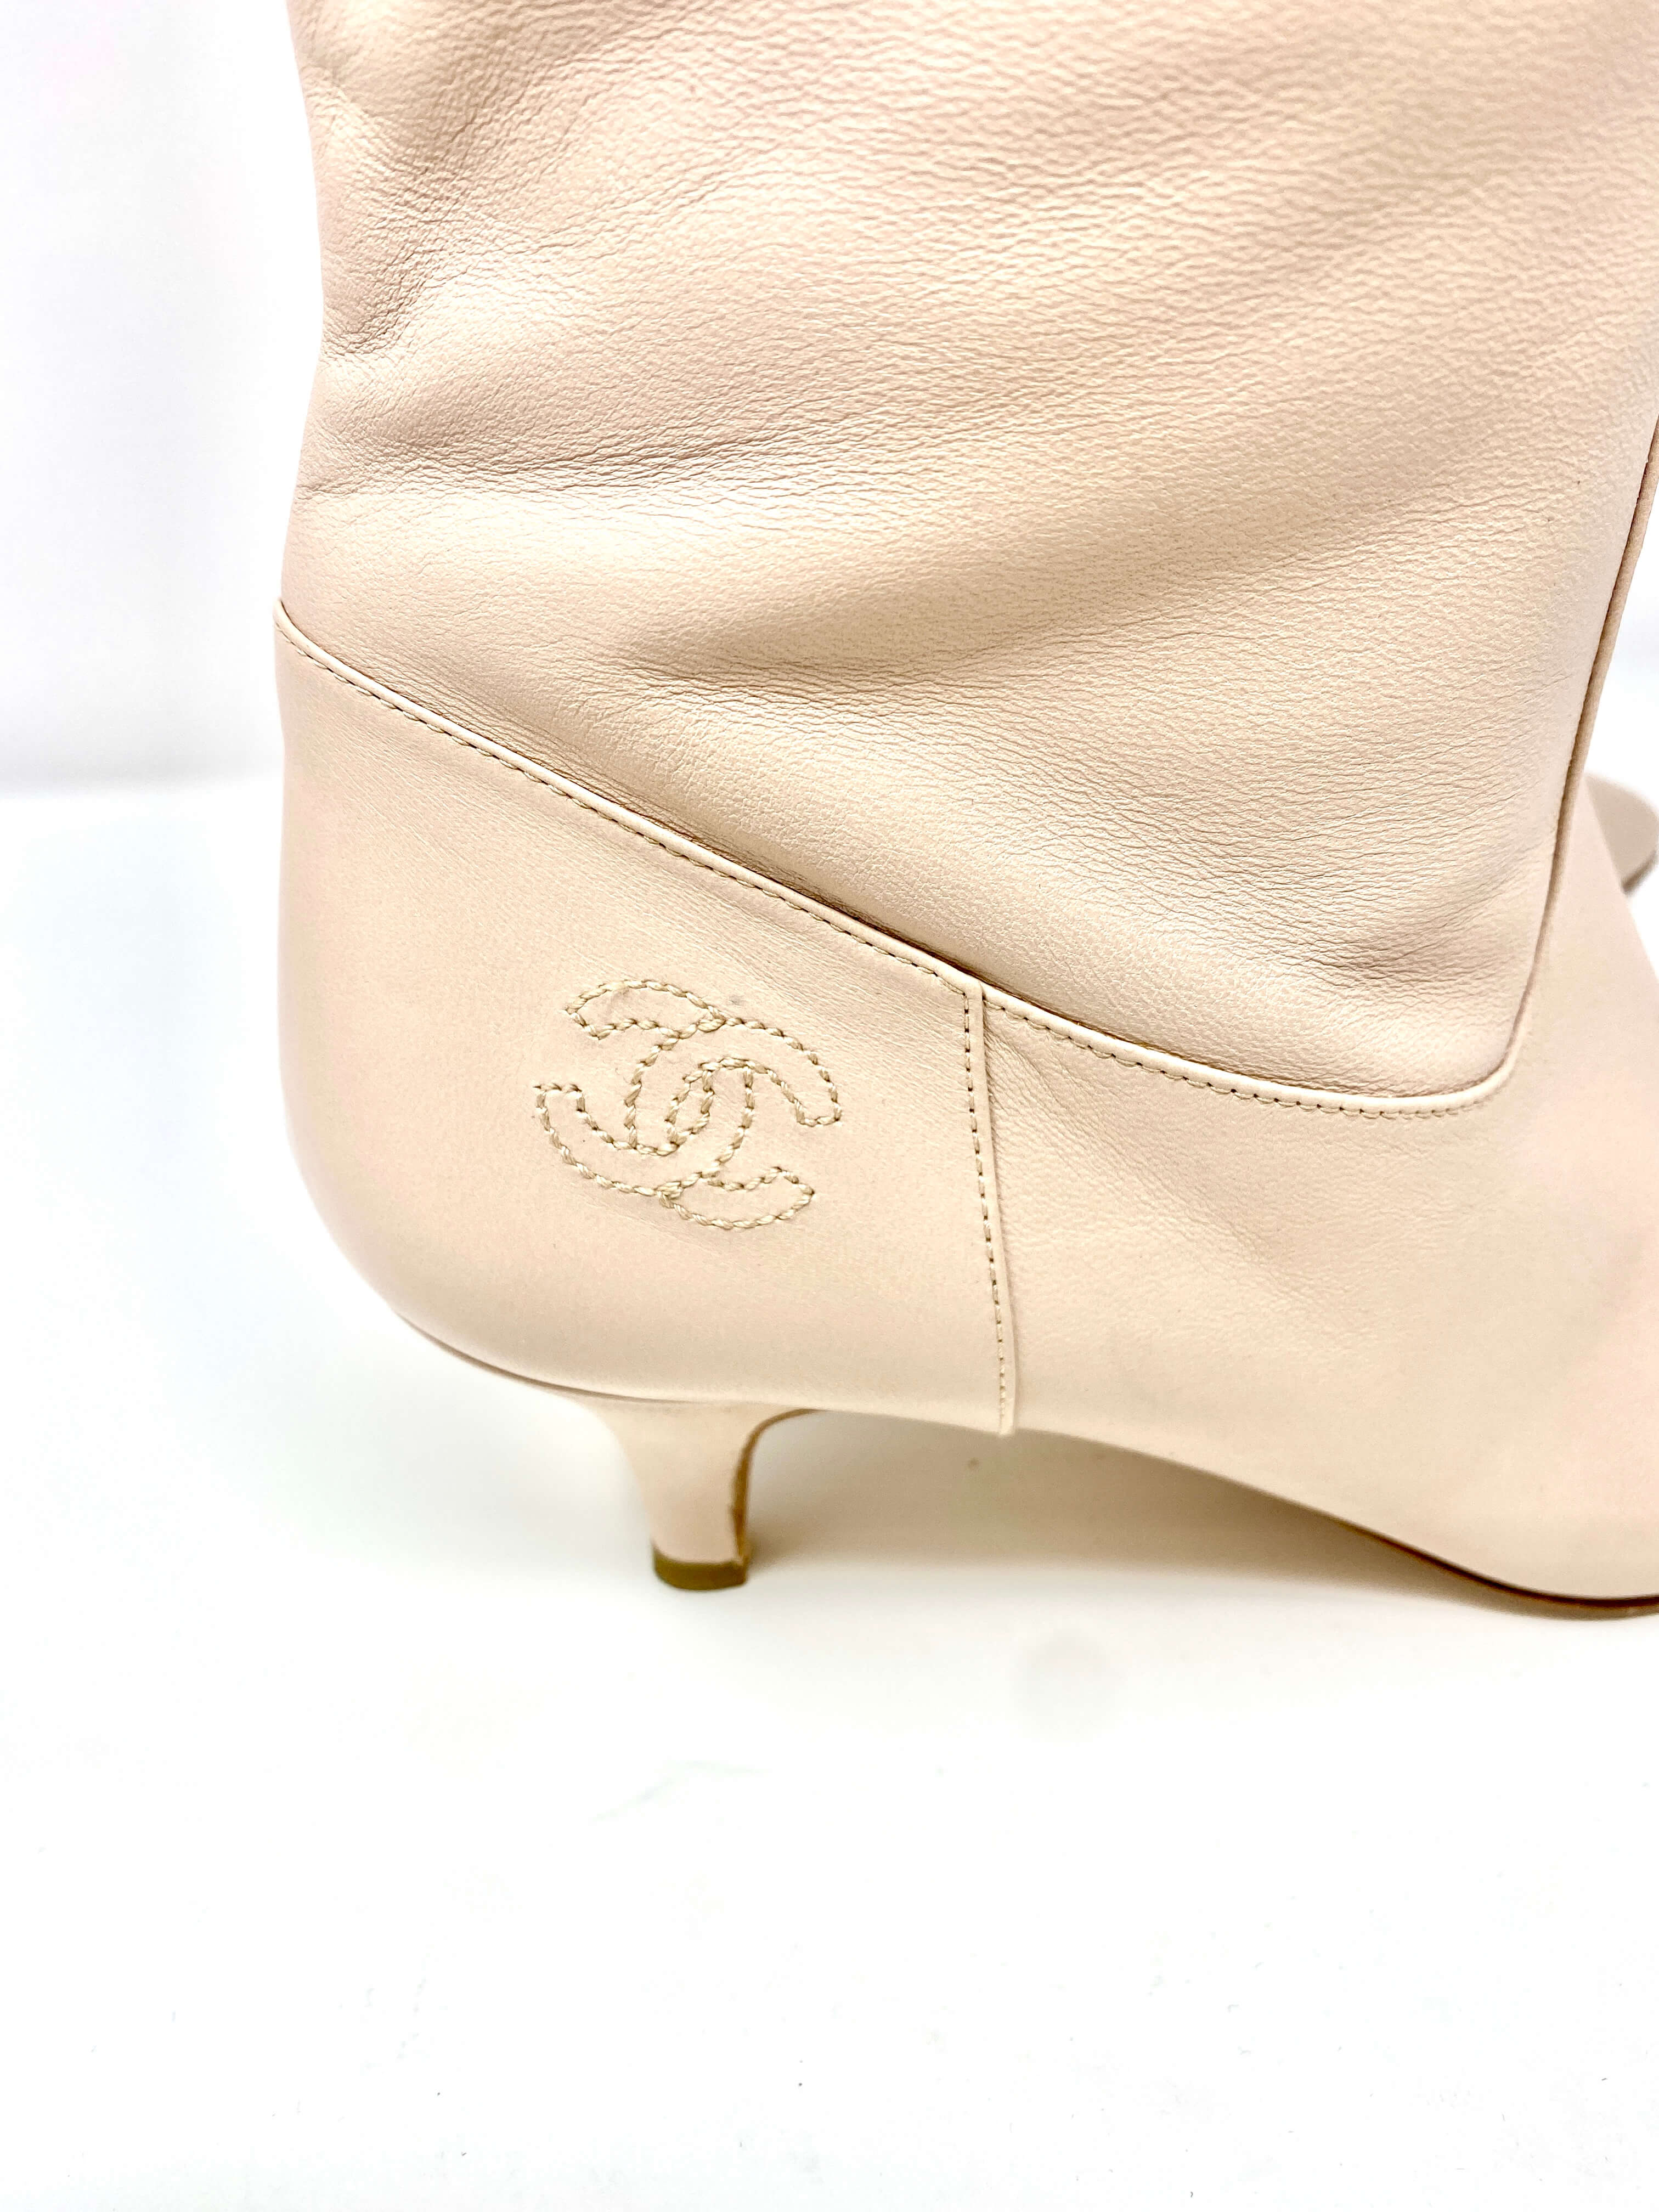 chanel high boots, beige leather, CC logo, knee-high.